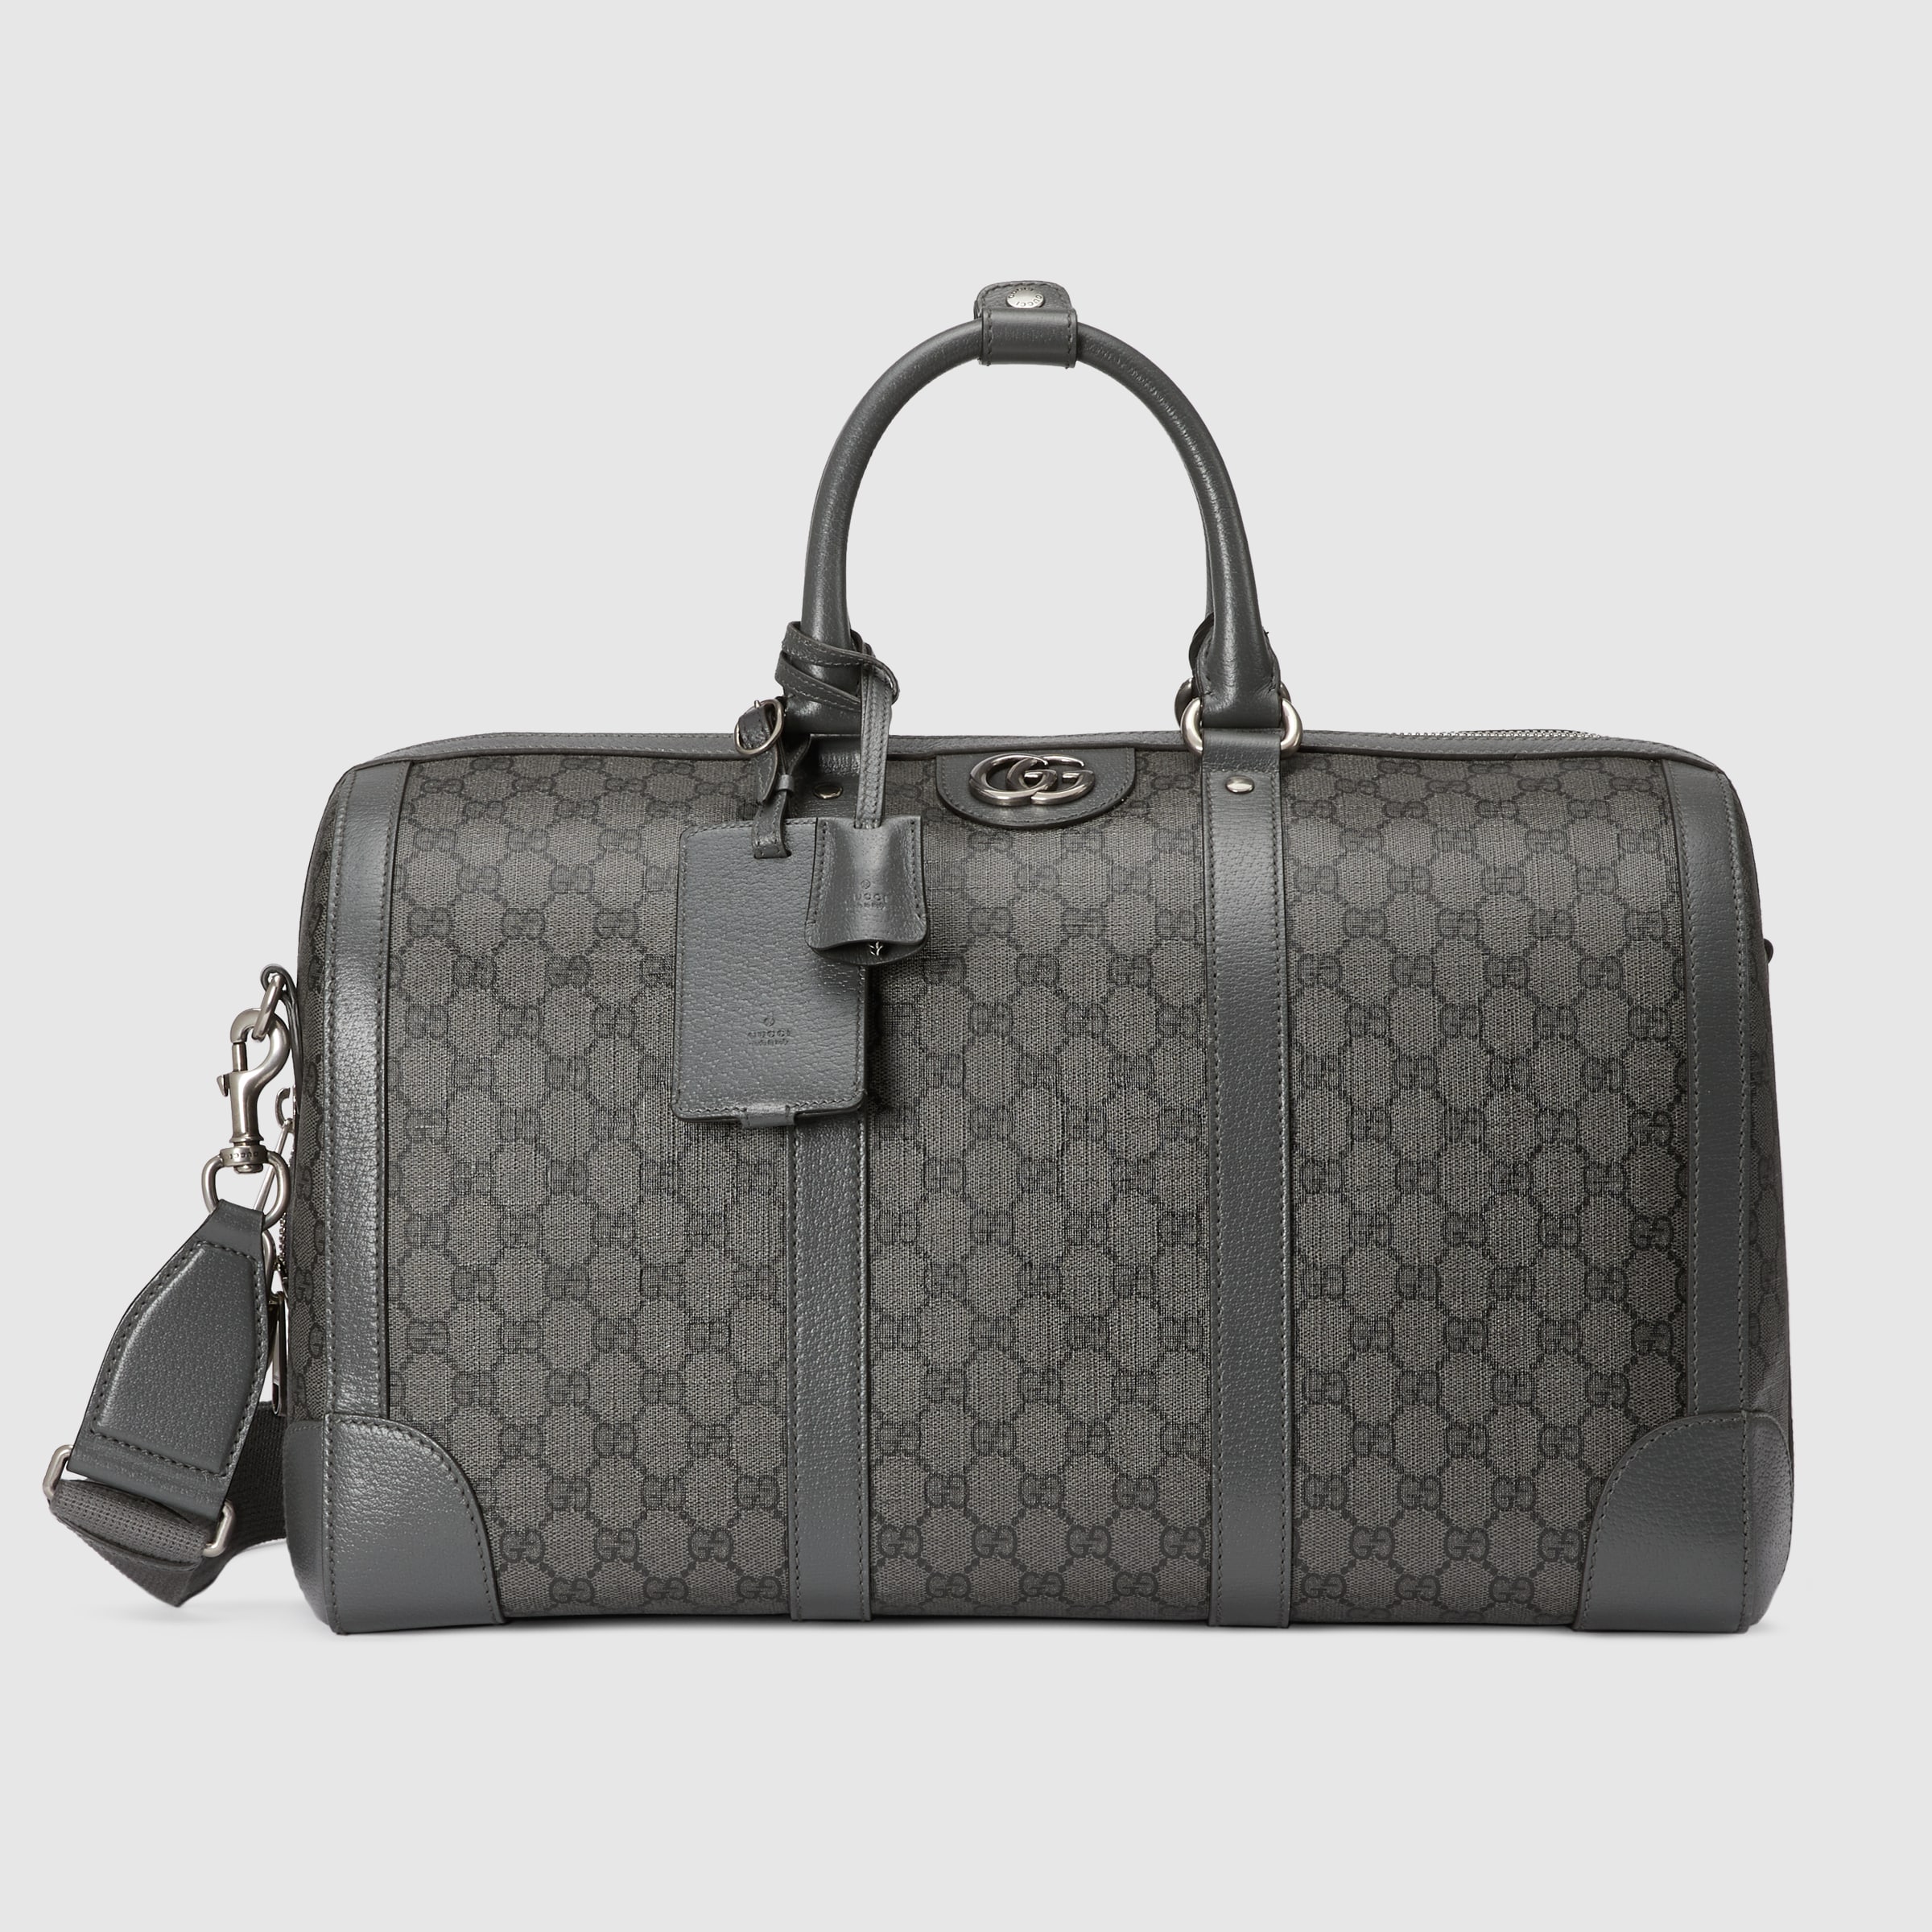 Gucci ophidia small duffle bag